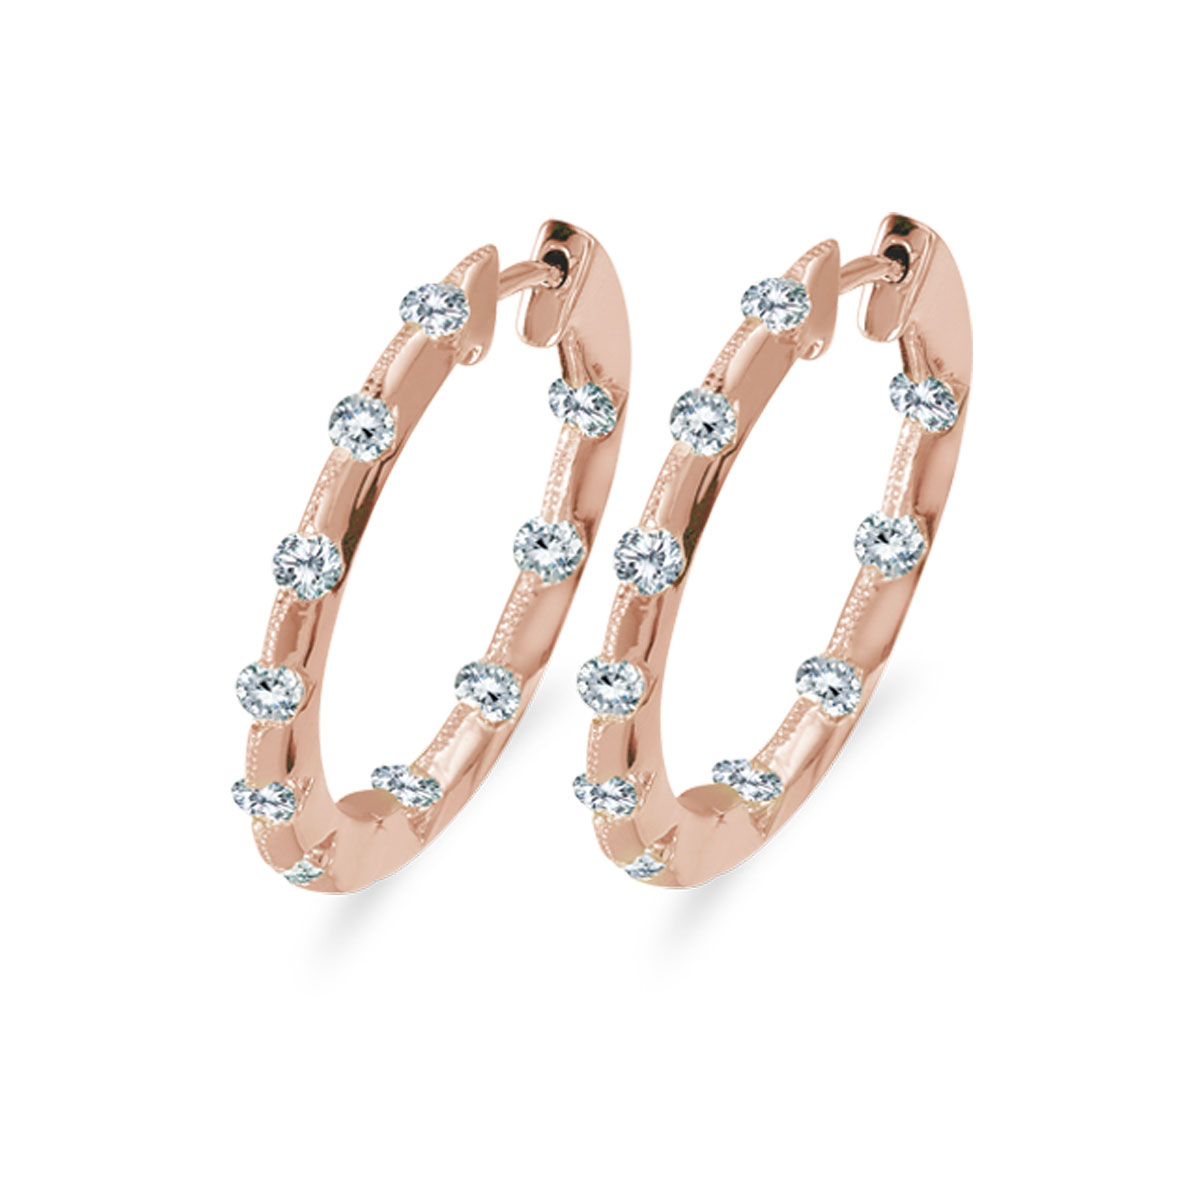 JCX2390: 24 mm diamond inside/outside hoop earrings in beautiful 14k rose gold. The perfect look for day or night. 1.00 carat genuine diamonds.